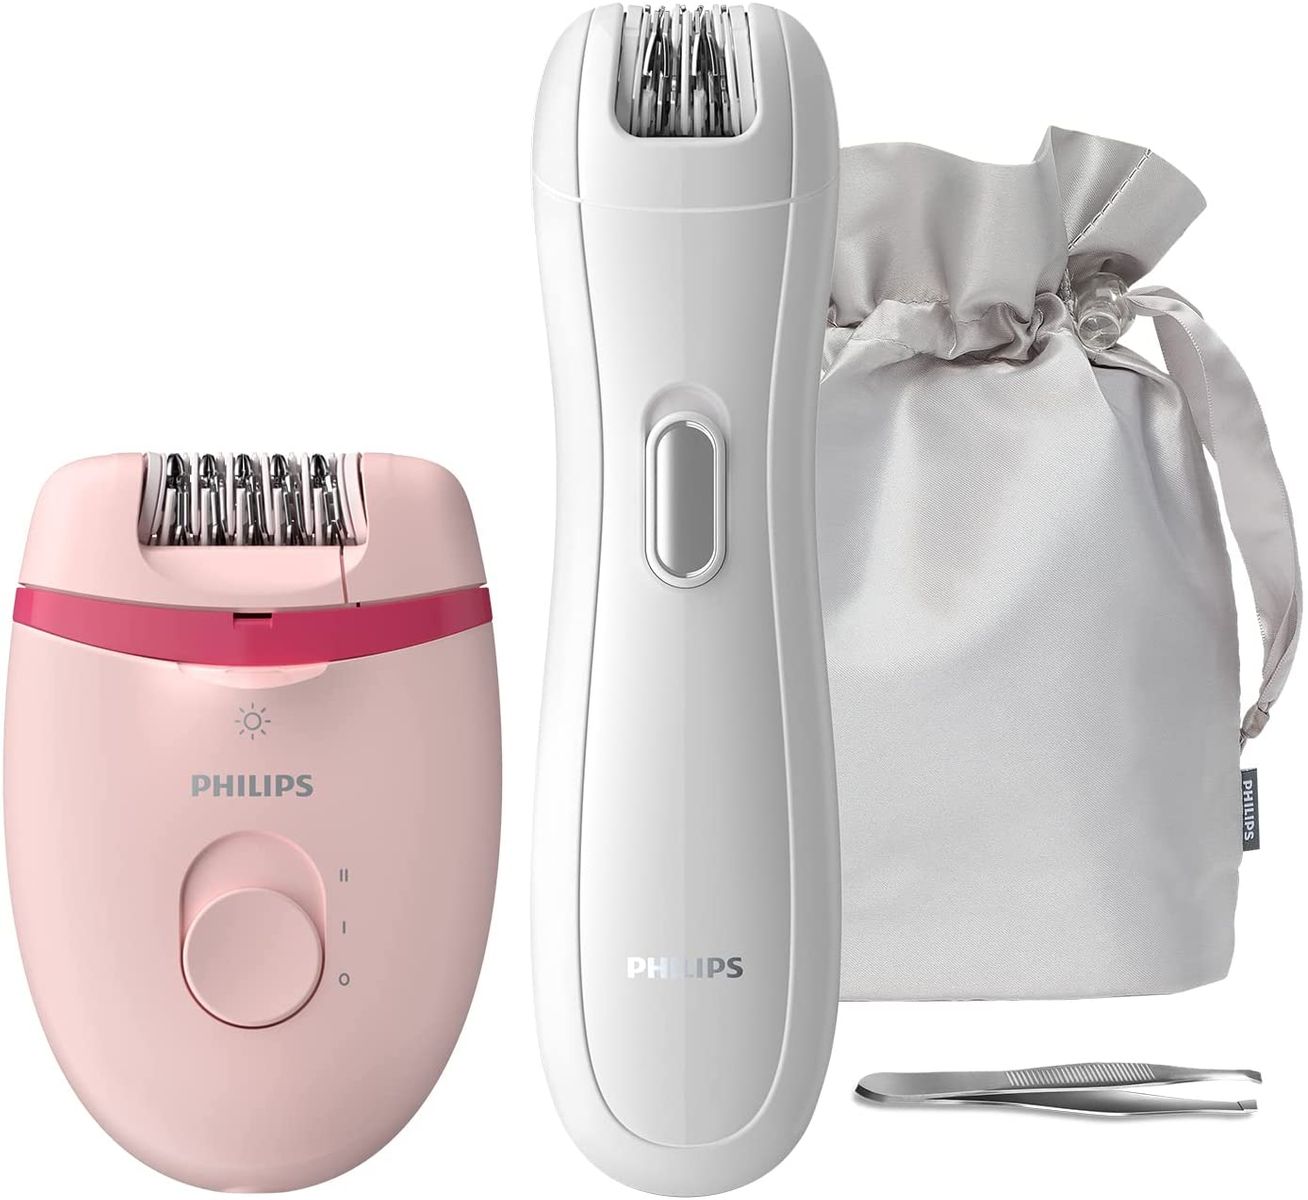 Philips Satinelle Essential epilator set BRP531/00 - Smooth skin for weeks, 2 speed settings, mini epilator for sensitive areas, tweezers for fine corrections, pink/white.